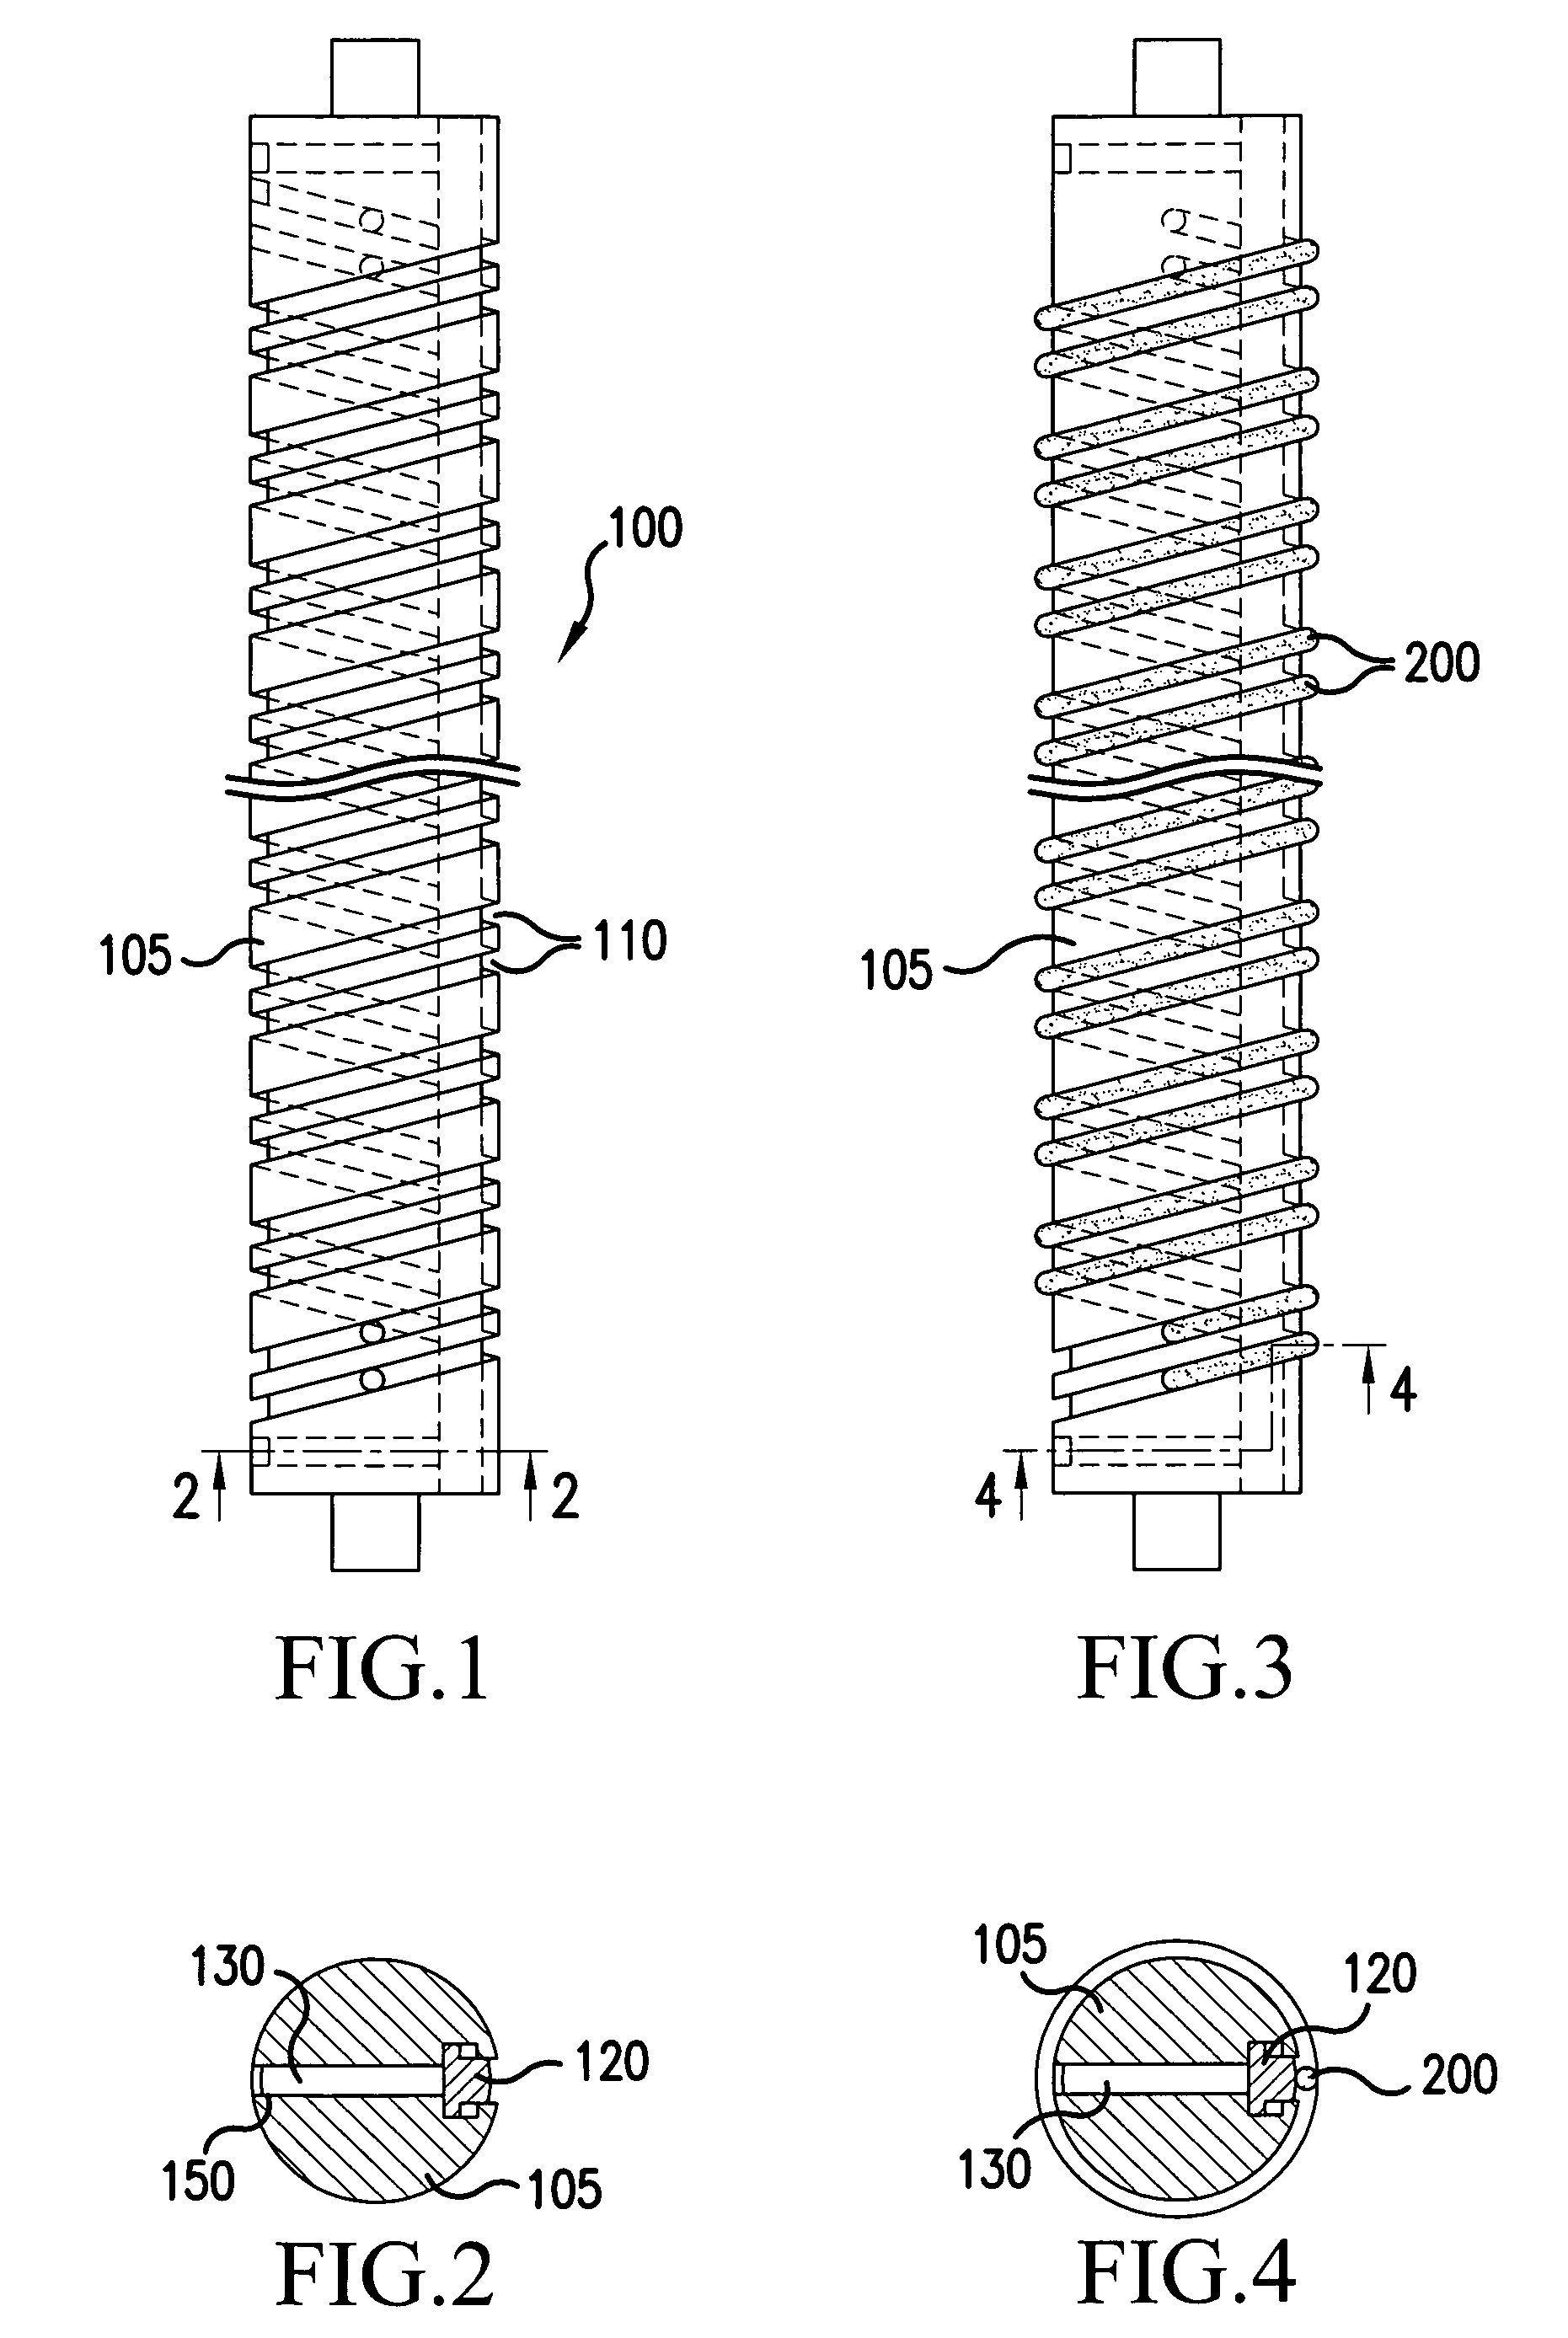 Manufacturing method for an LED light string and a jig for making the LED light string